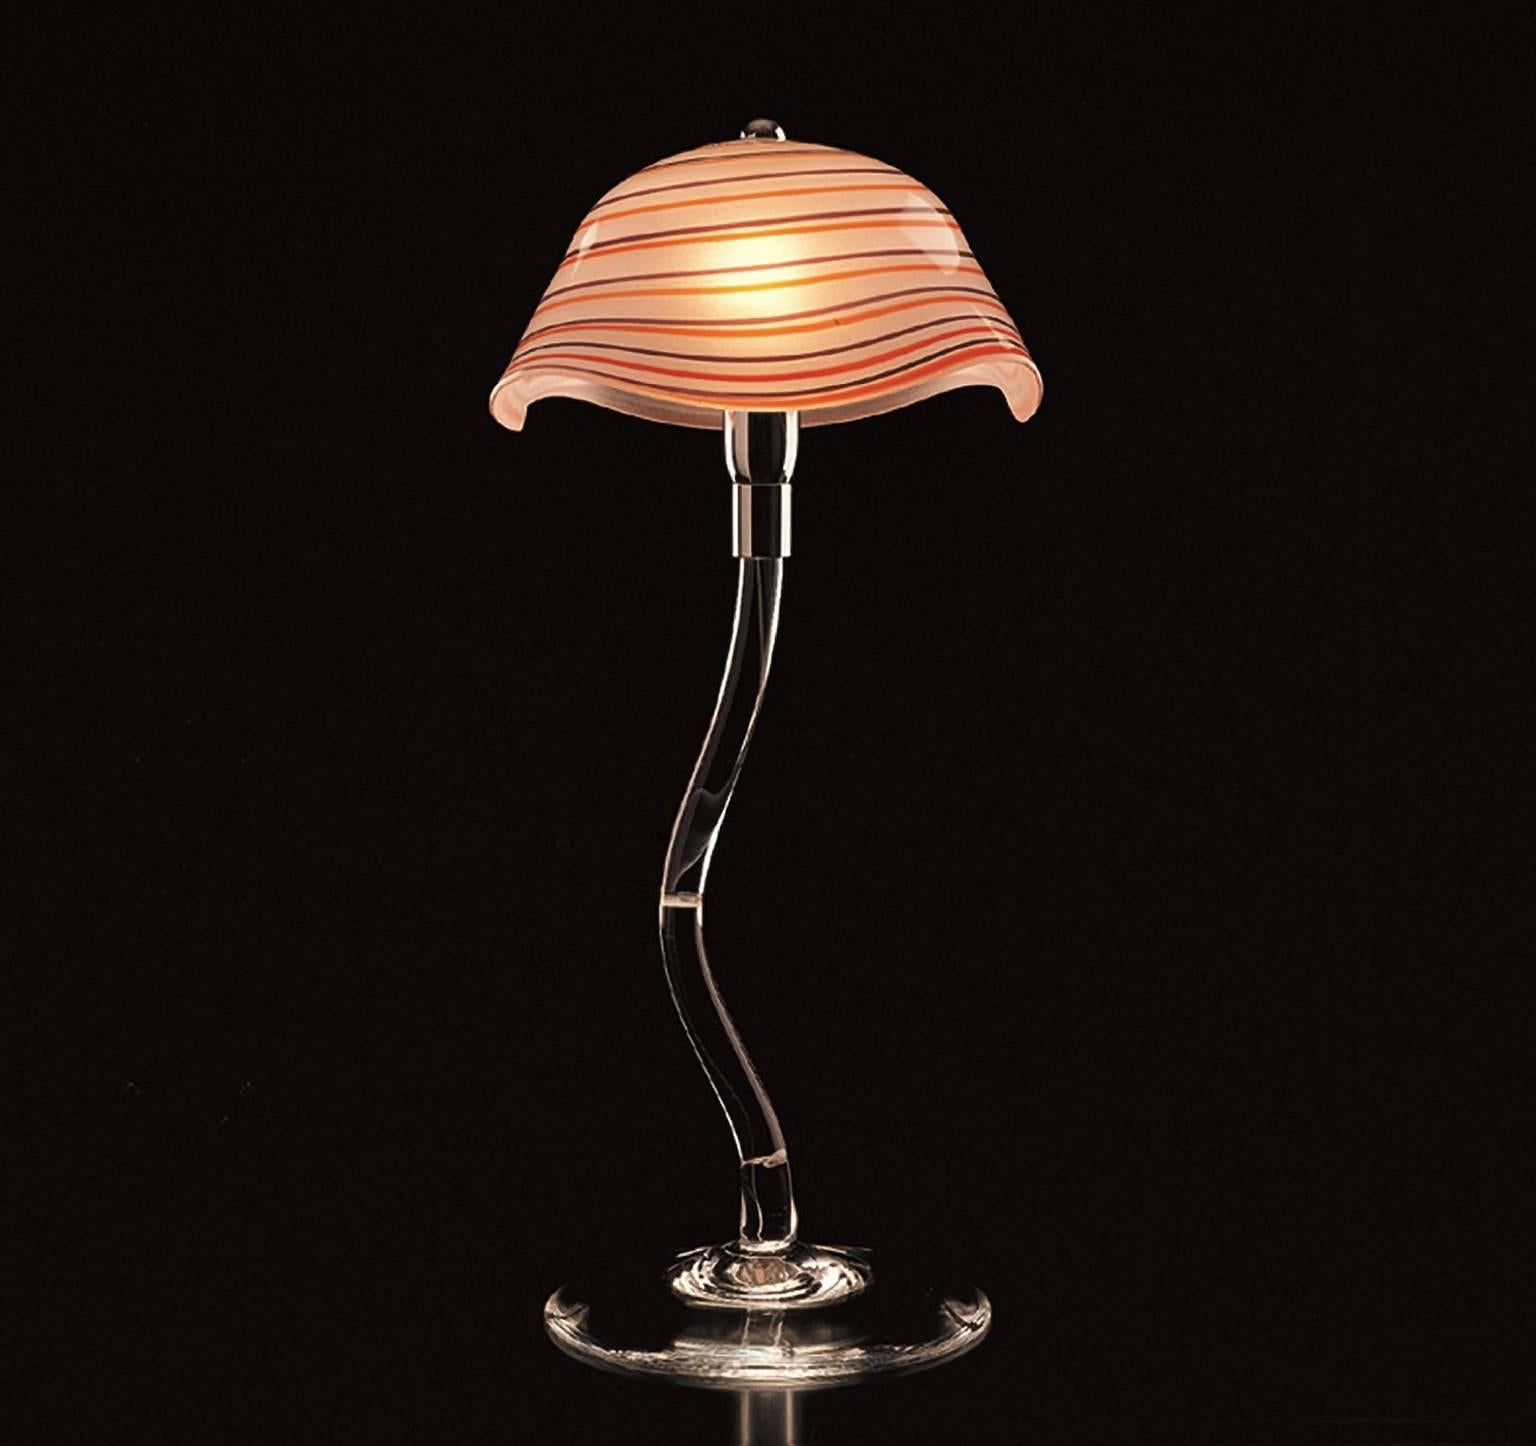 Table lamp with rod and base in transparent Murano glass. Satin glass shade made with a freehand technique and spirals in two different colors. The lamp was designed by Carlo Moretti in 1996. 

40 watt incandescent bulb, 28 watt ecolamp socket